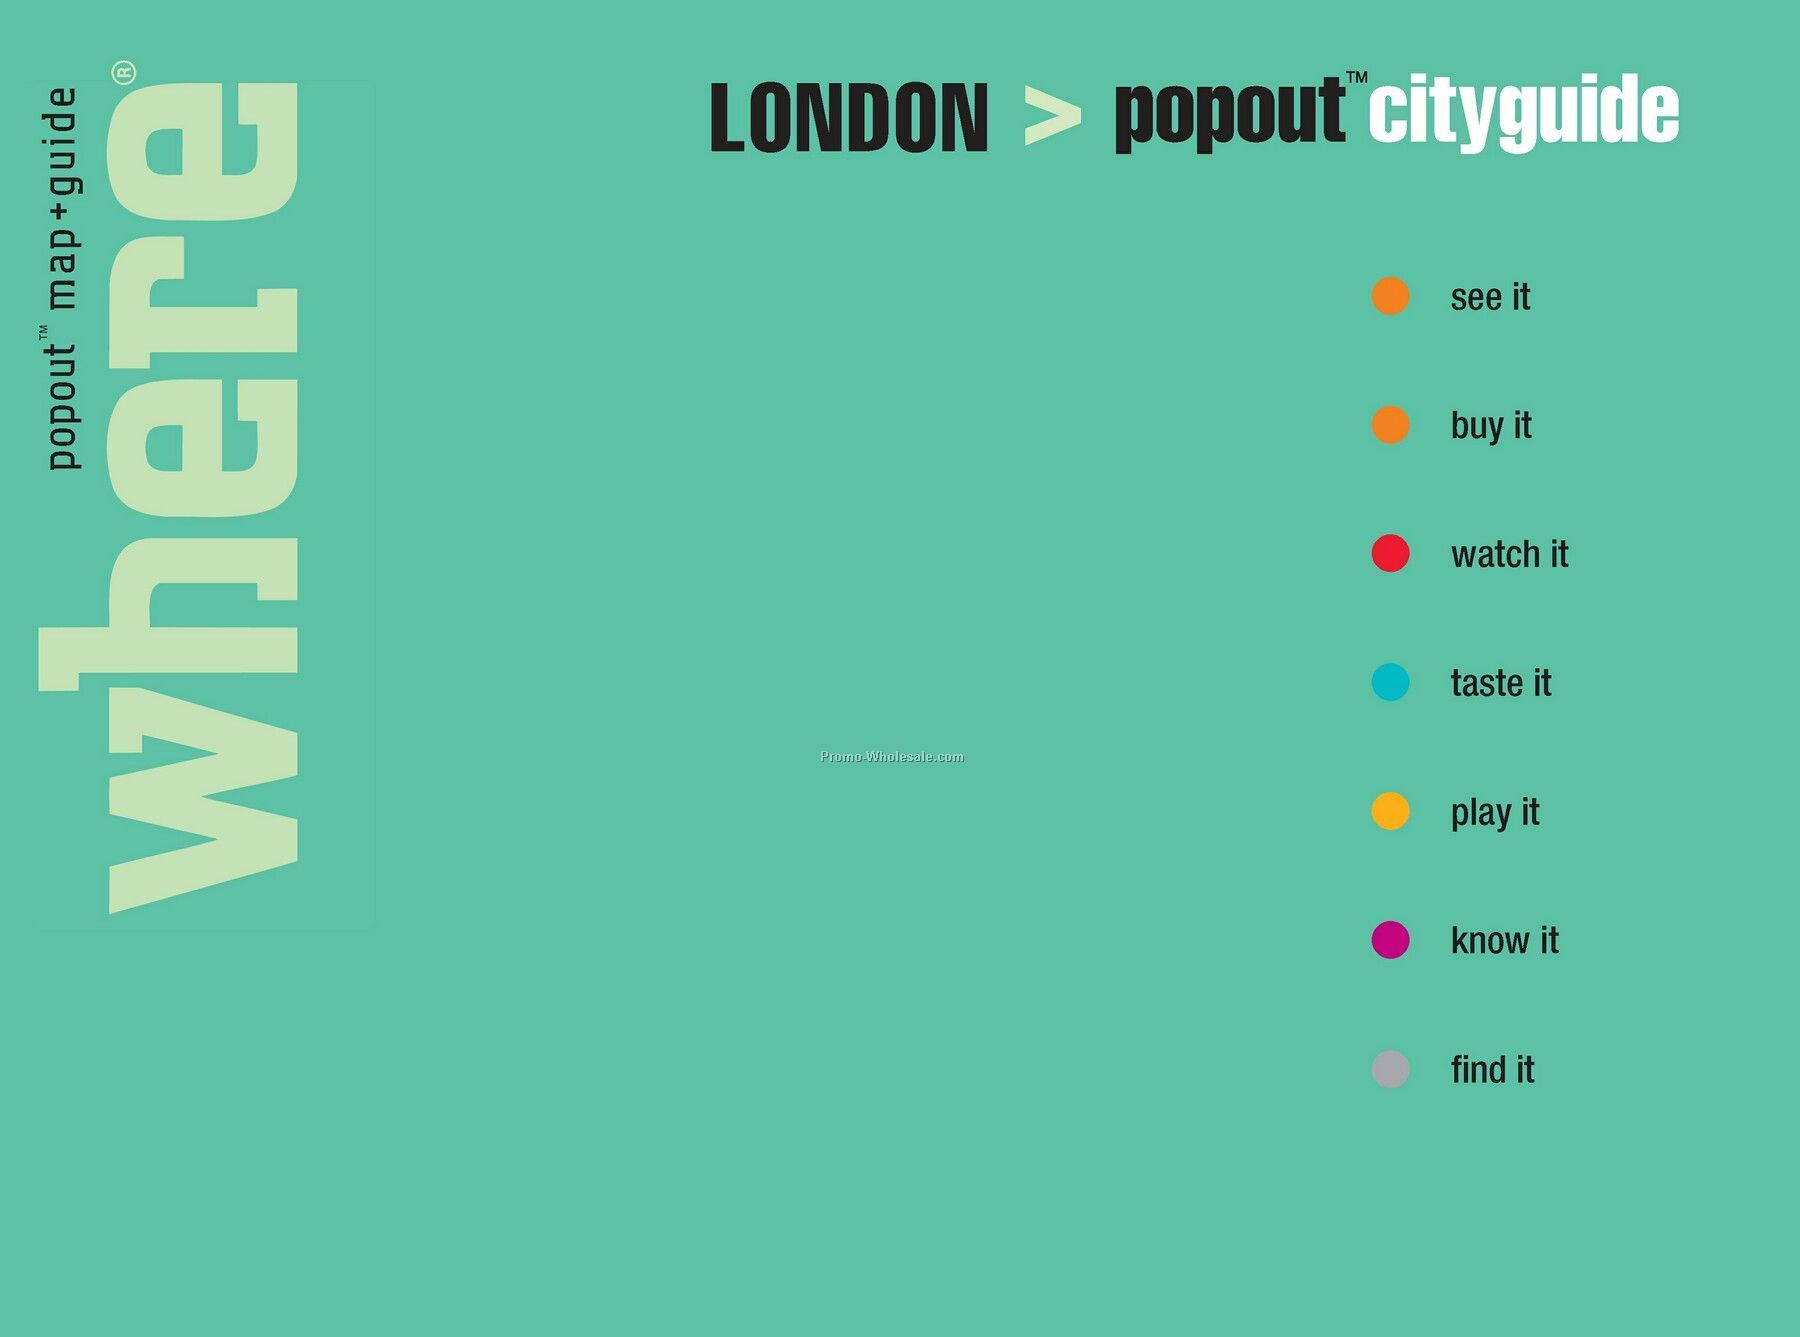 Travel Guides - International Guide Of London - Featuring Popout Maps